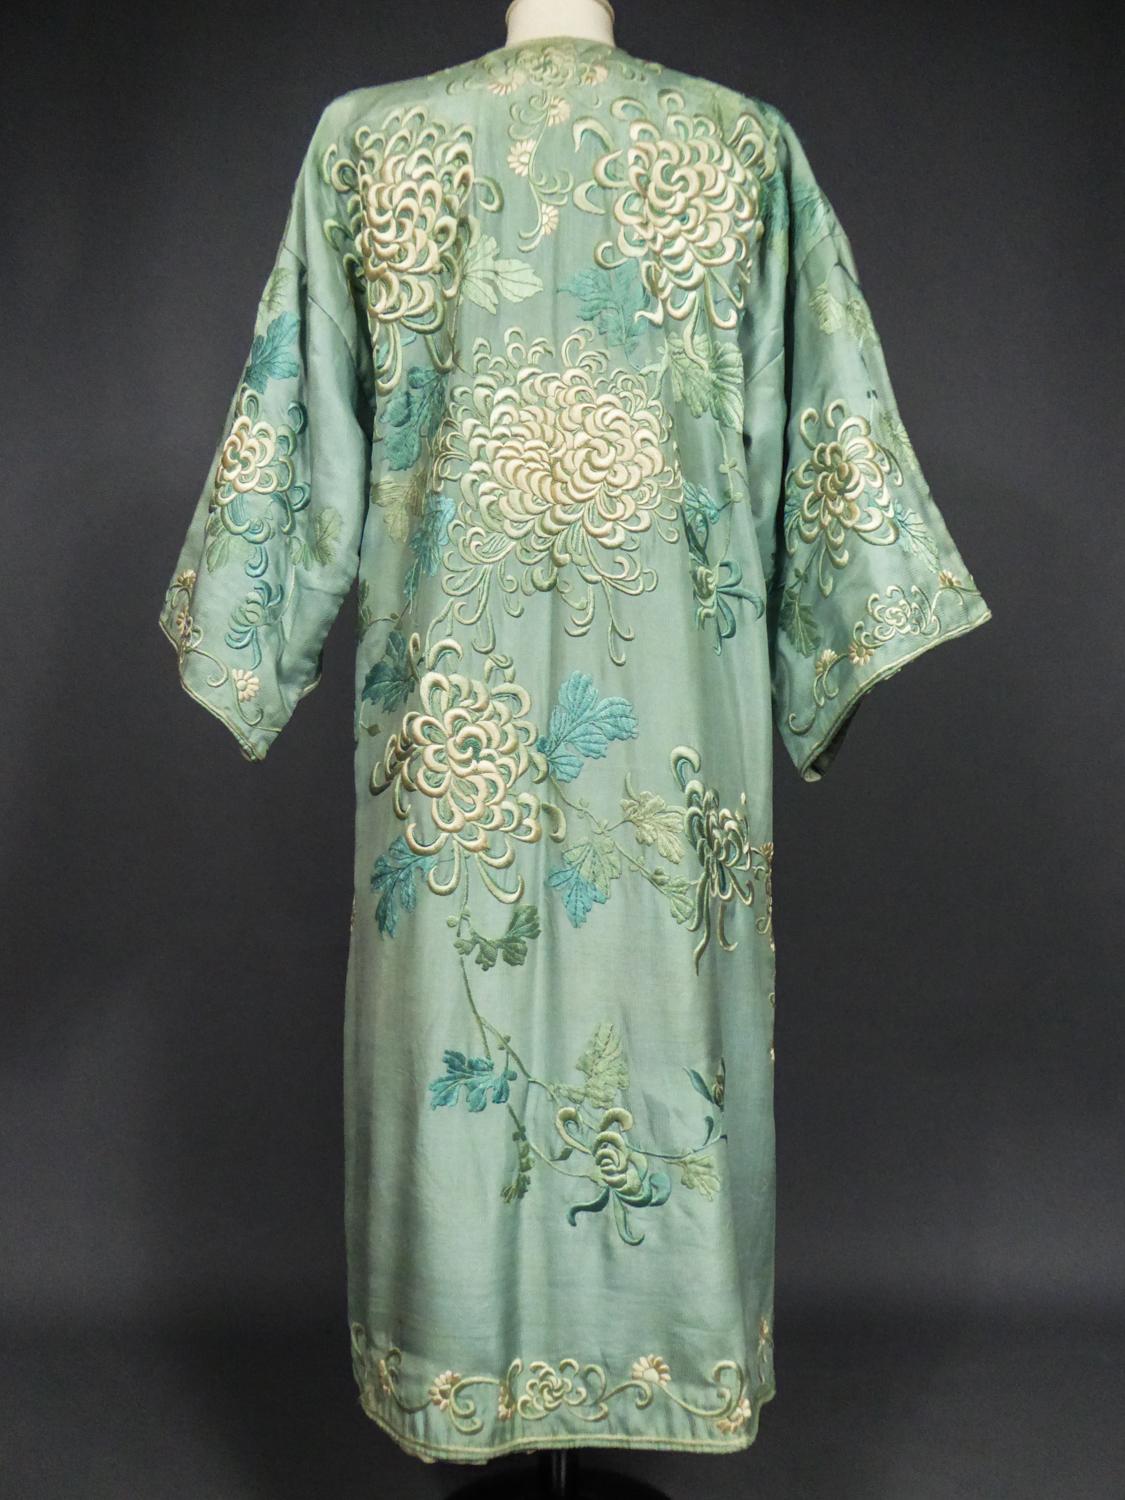 A Crepe Silk Embroidered Evening Japonese Coat for Europe Circa 1920 8